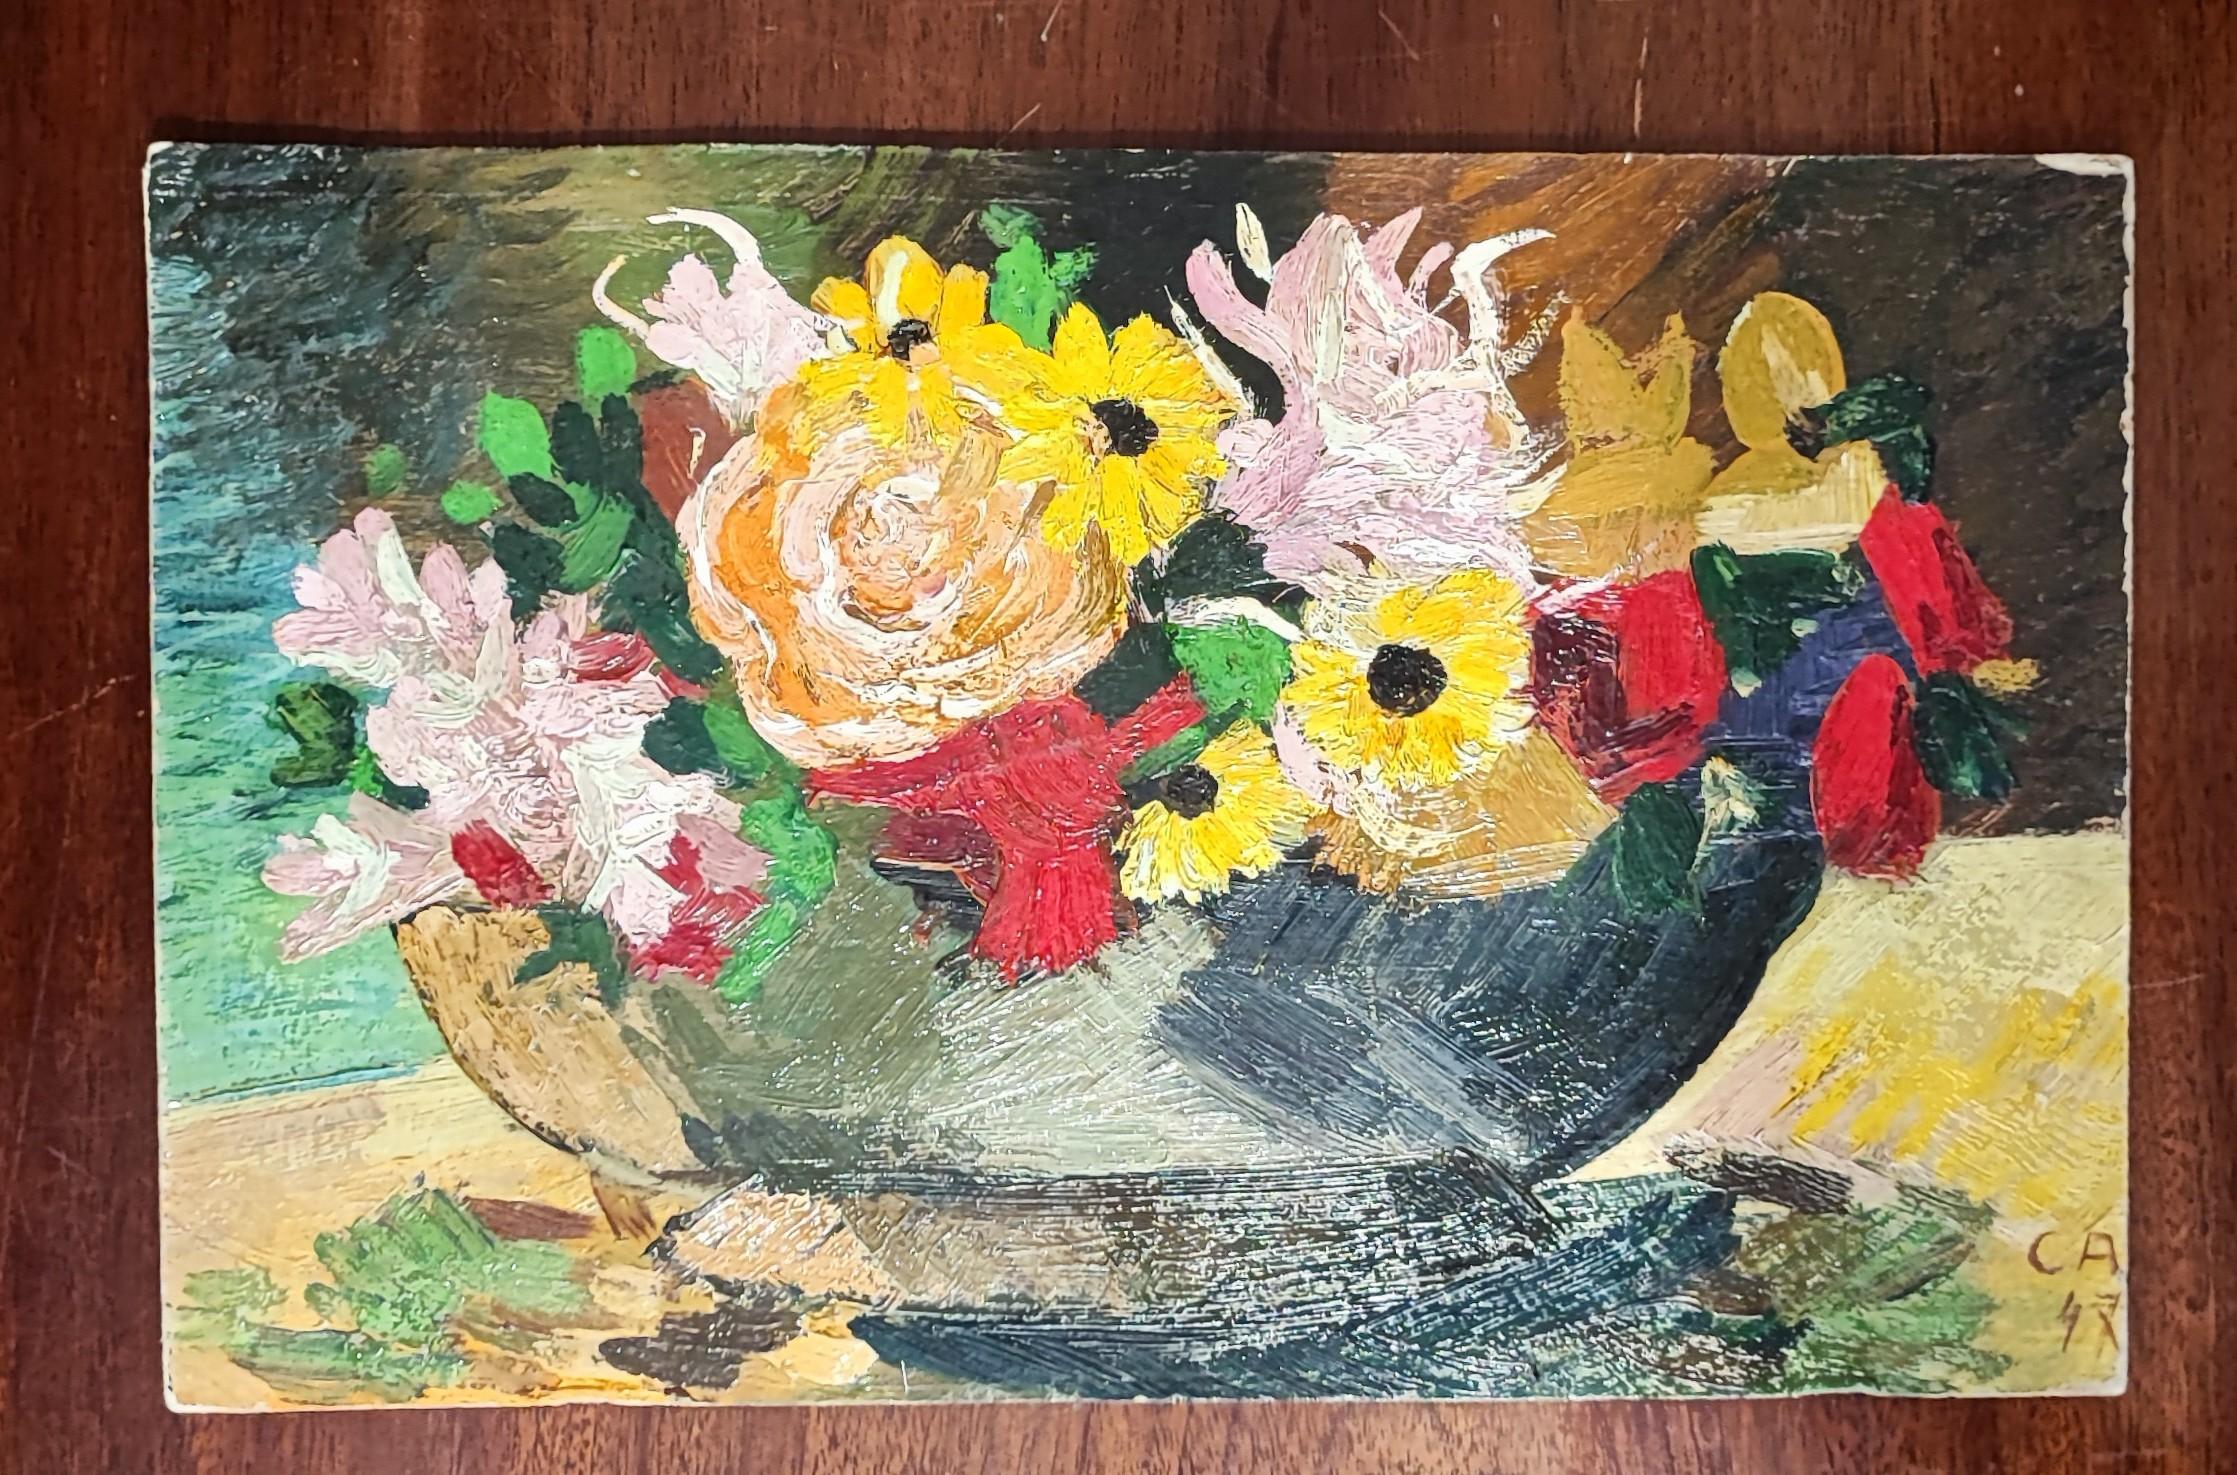 Spring composition - Painting by C.A.